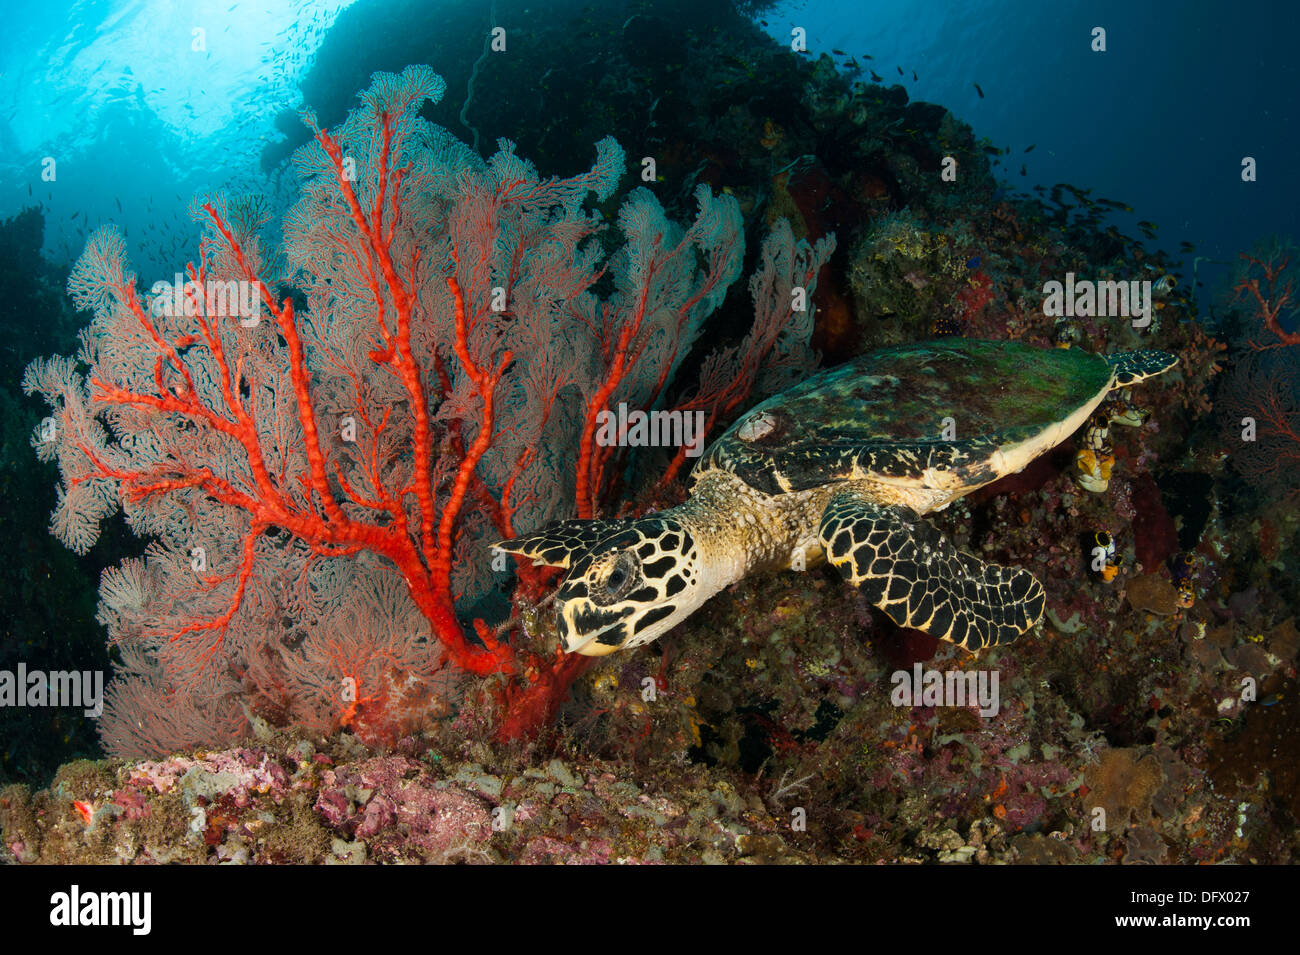 Close-up view of a Hawksbill sea turtle next to a red sea fan on a reef in Raja Ampat, West Papua, Indonesia. Stock Photo